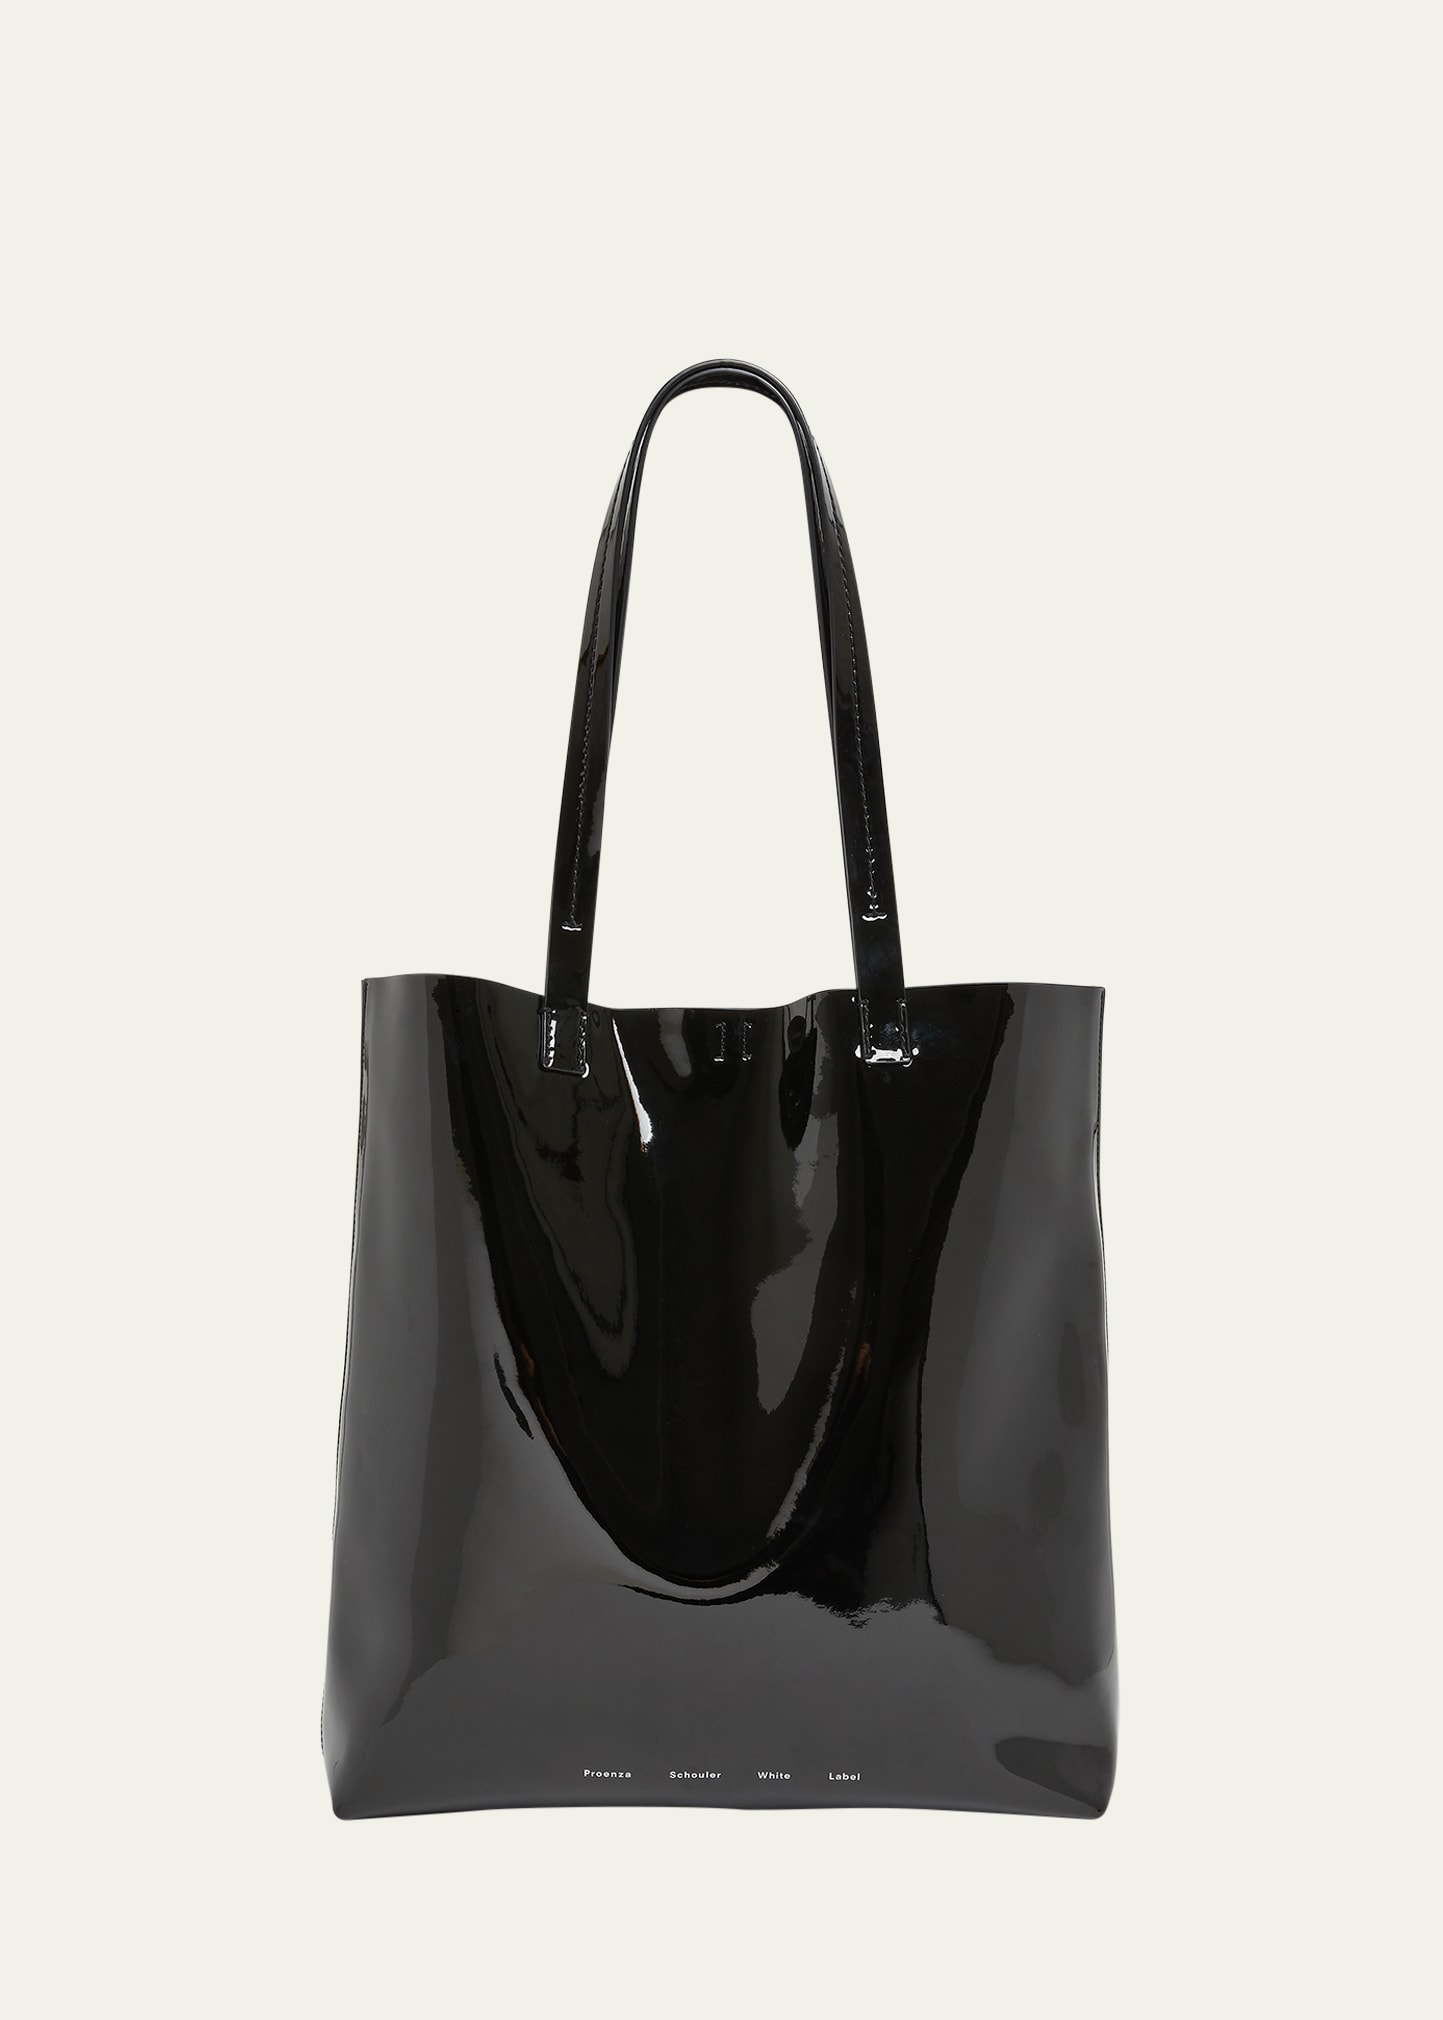 Proenza Schouler White Label Walker Patent Leather Tote Bag In Black